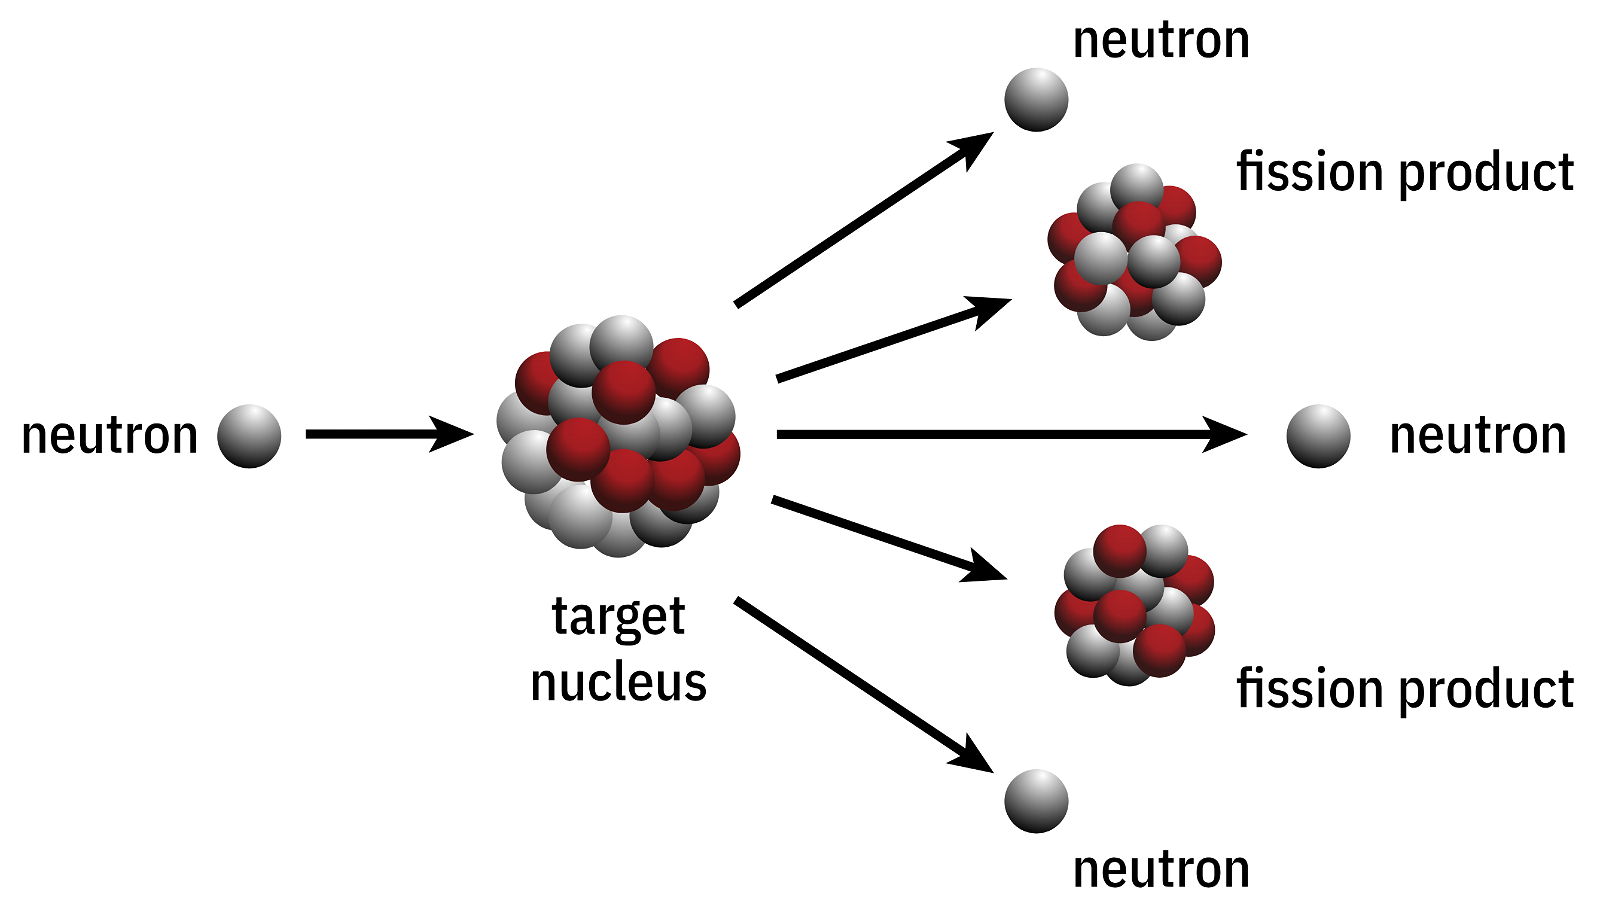 Nuclear Fission 